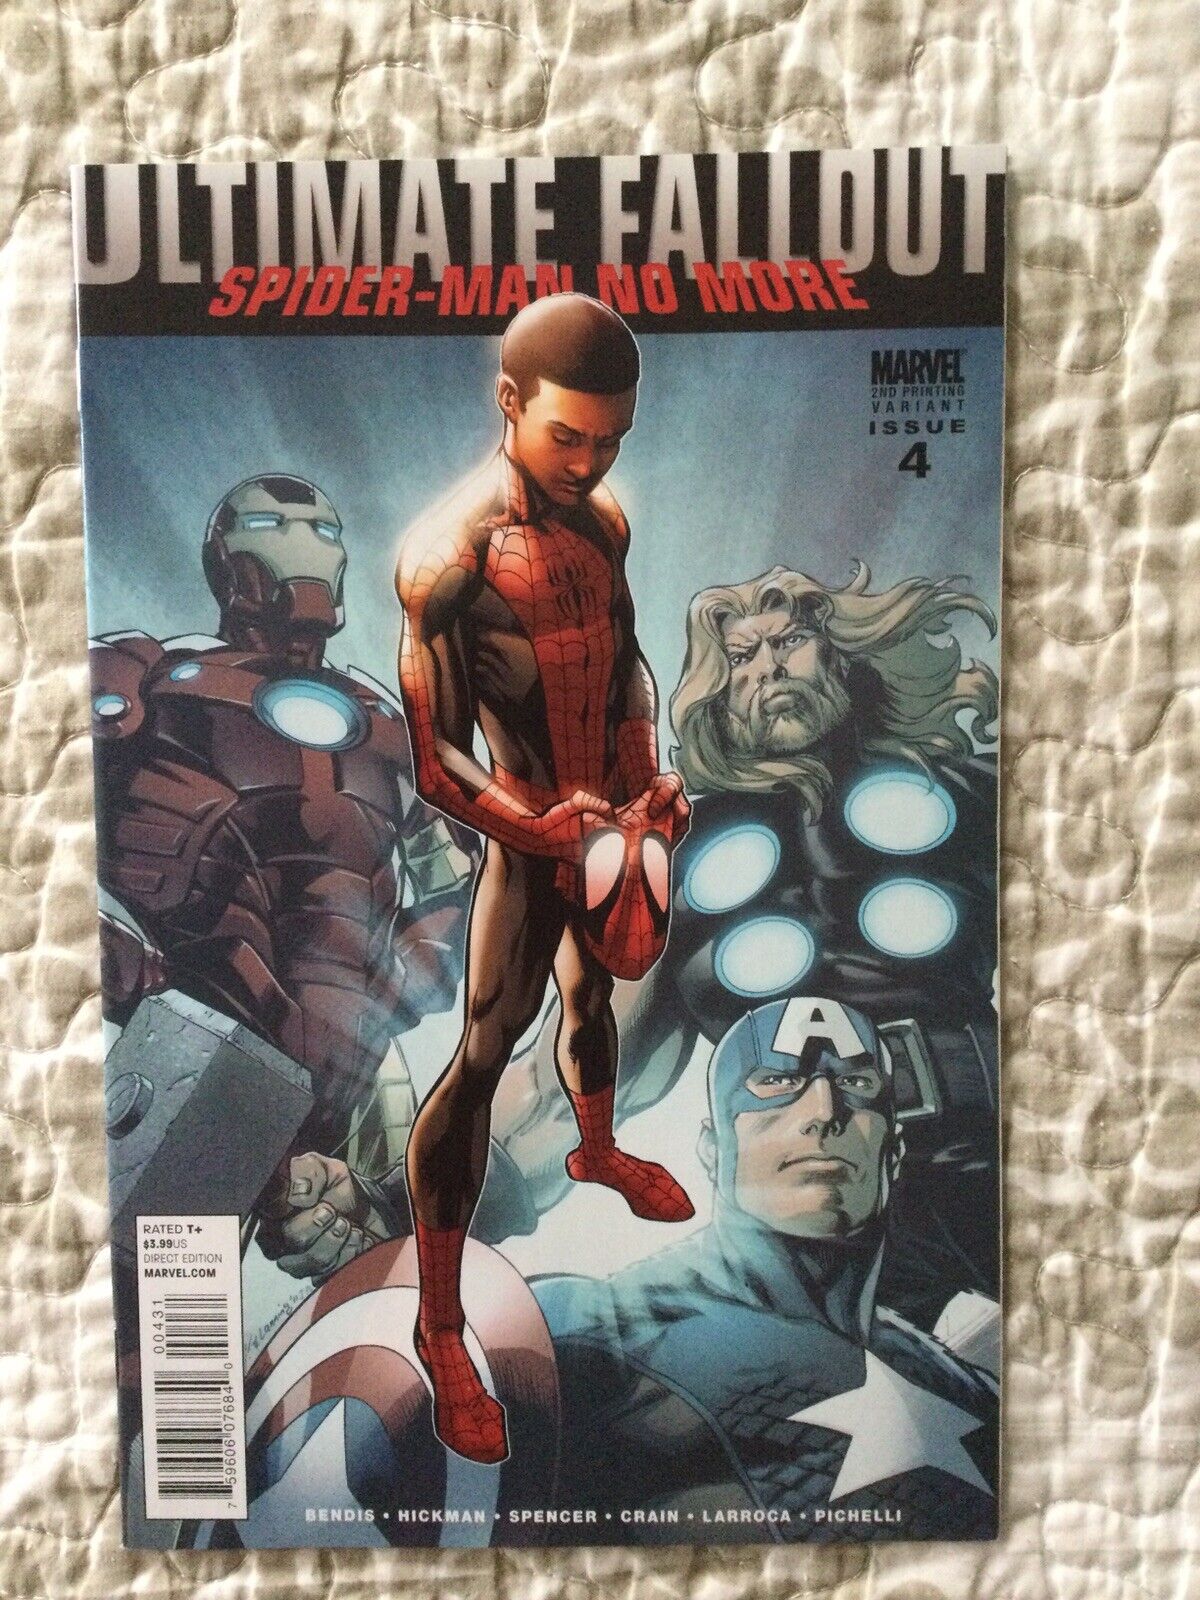 Ultimate Fallout #4 First Appearance Miles Morales. NM-. Beautiful Copy🔥